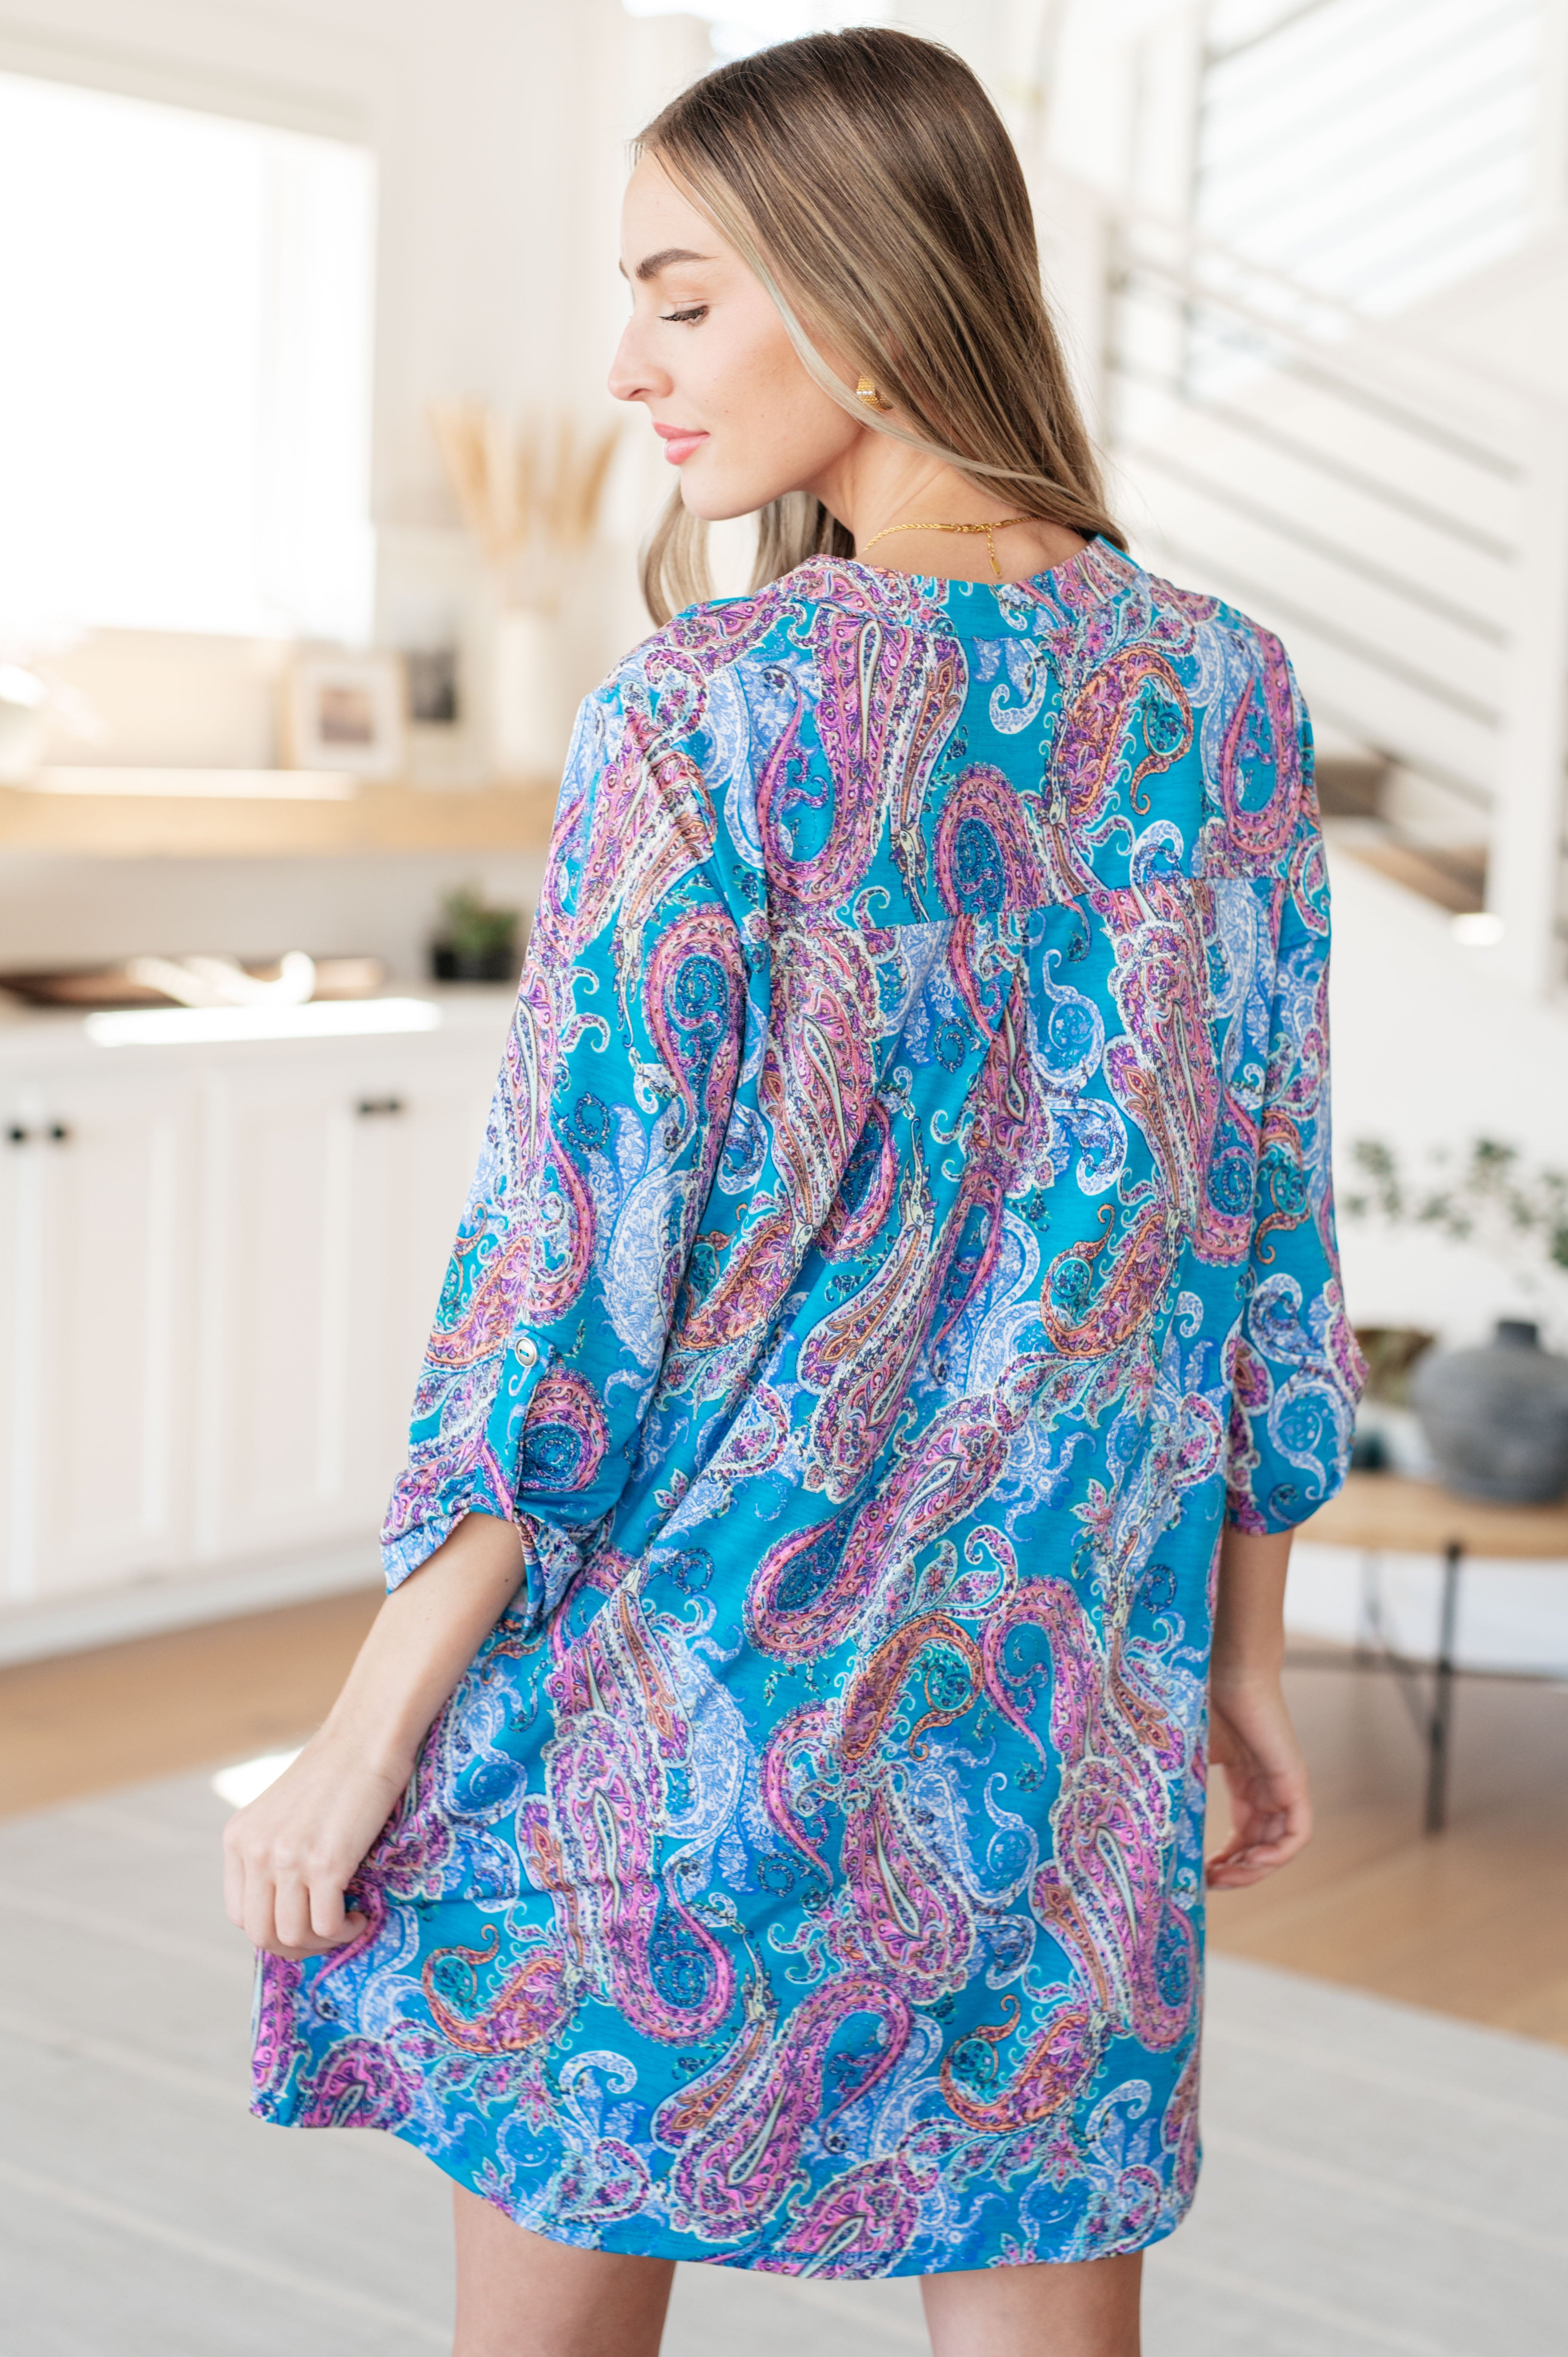 Lizzy Dress in Teal and Pink Paisley Dresses Ave Shops   